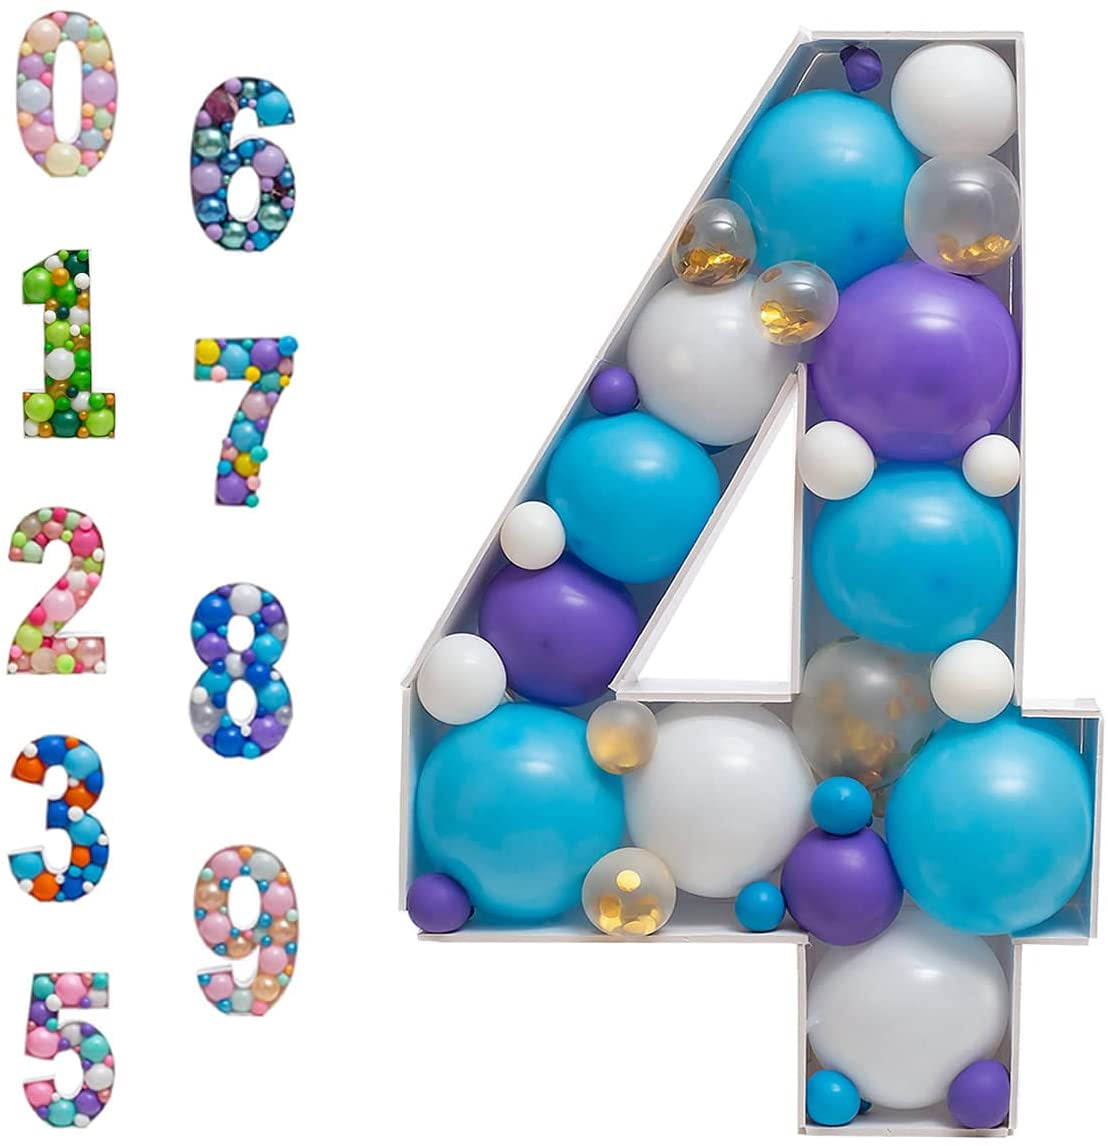  SKEFOLI 4FT Marquee Numbers, Mosaic Numbers for Balloons  Pre-Cut Extra Large Cardboard Numbers Foam Board Birthday Backdrop for 21st  30th 40th 50th 60th Anniversary Party Decorations : Toys & Games